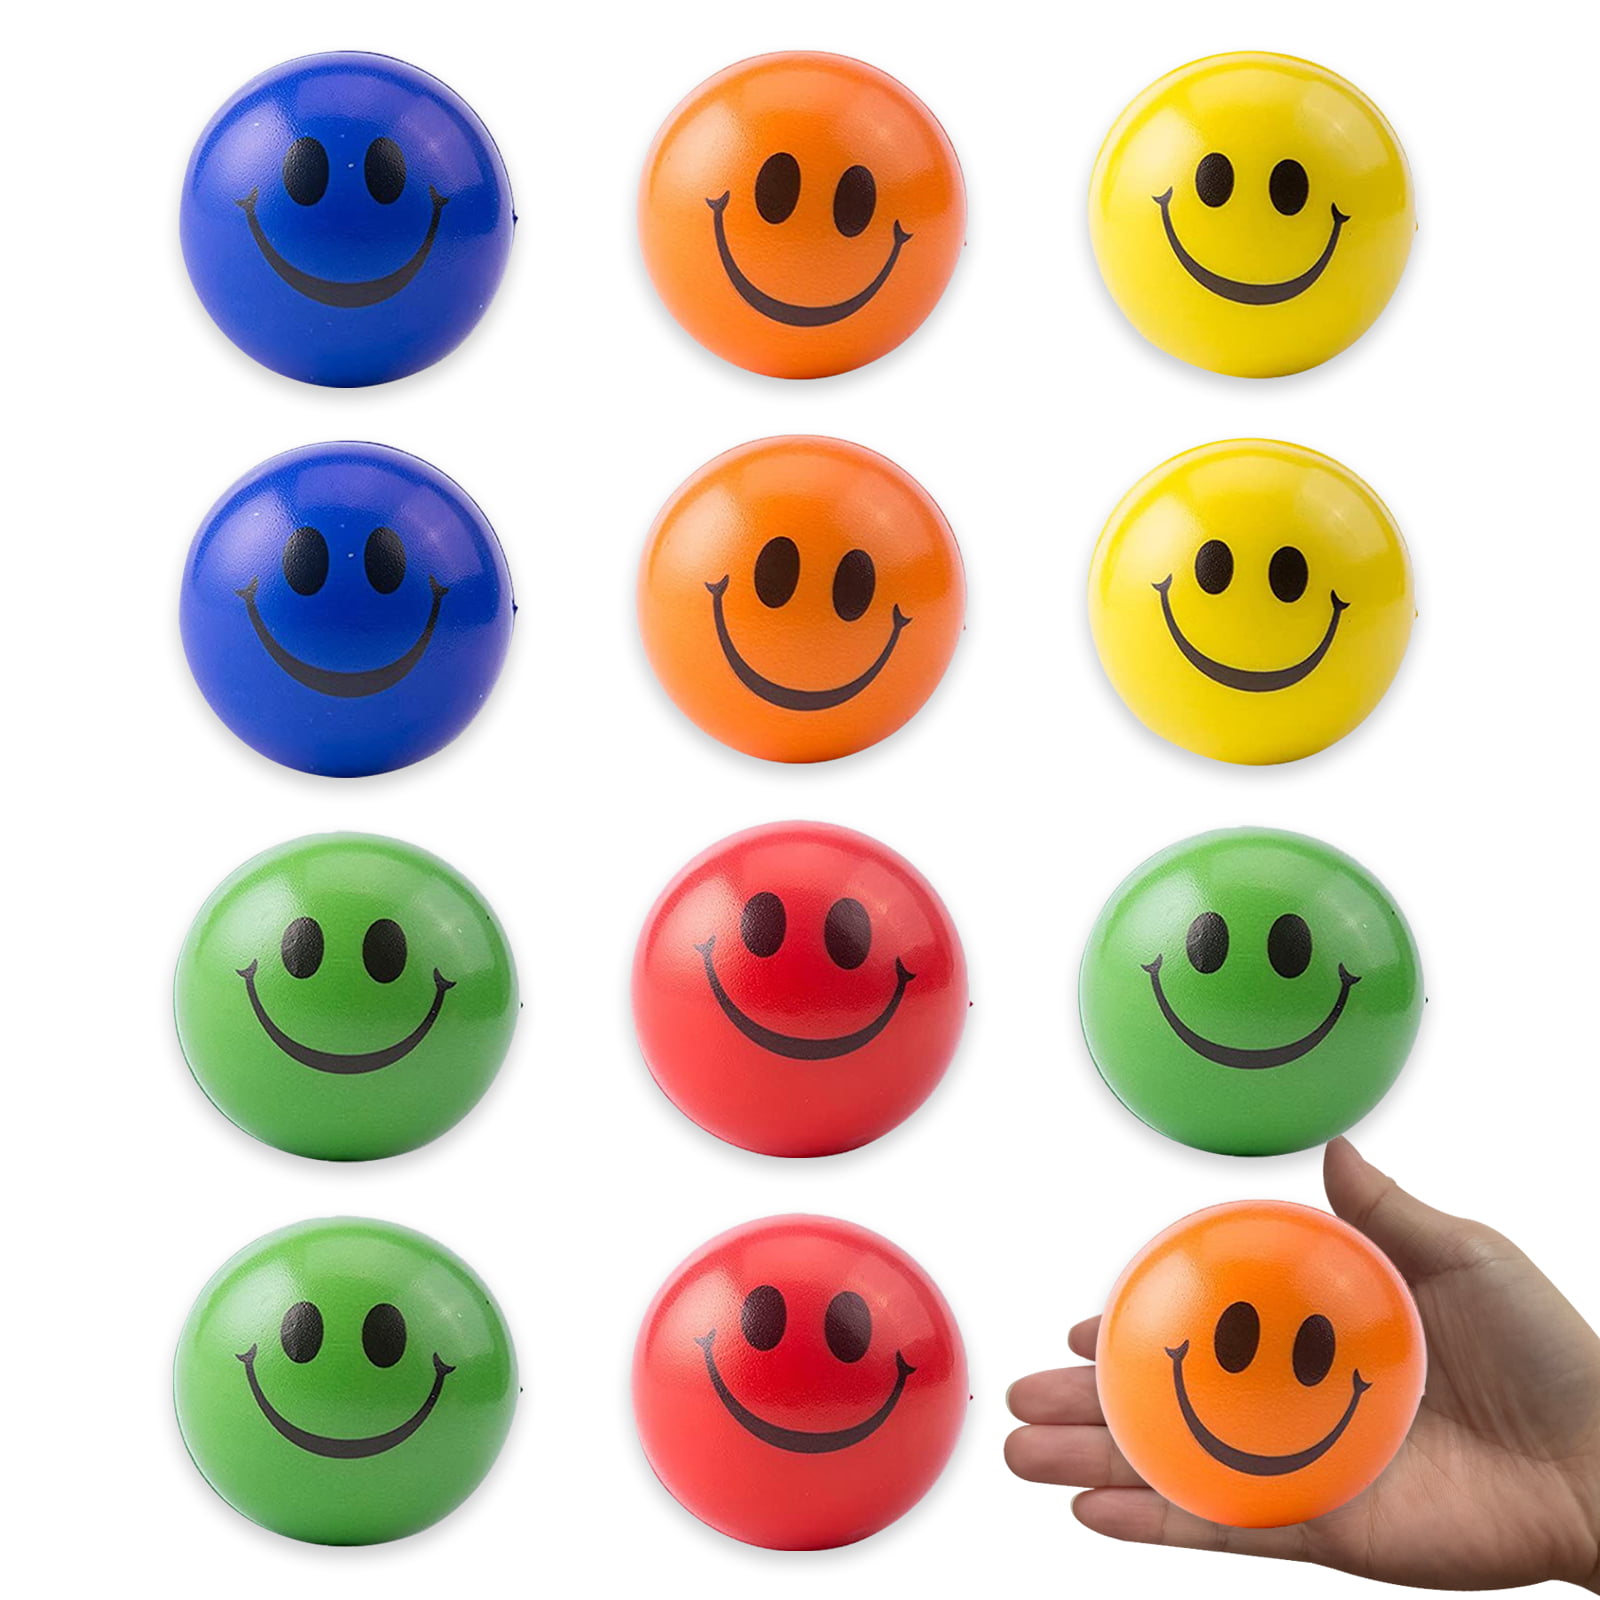 20 SMILE SMILEY FACE STRESS RELIEF BALLS 2" FOAM HAND THERAPY SQUEEZE TOY BALL 